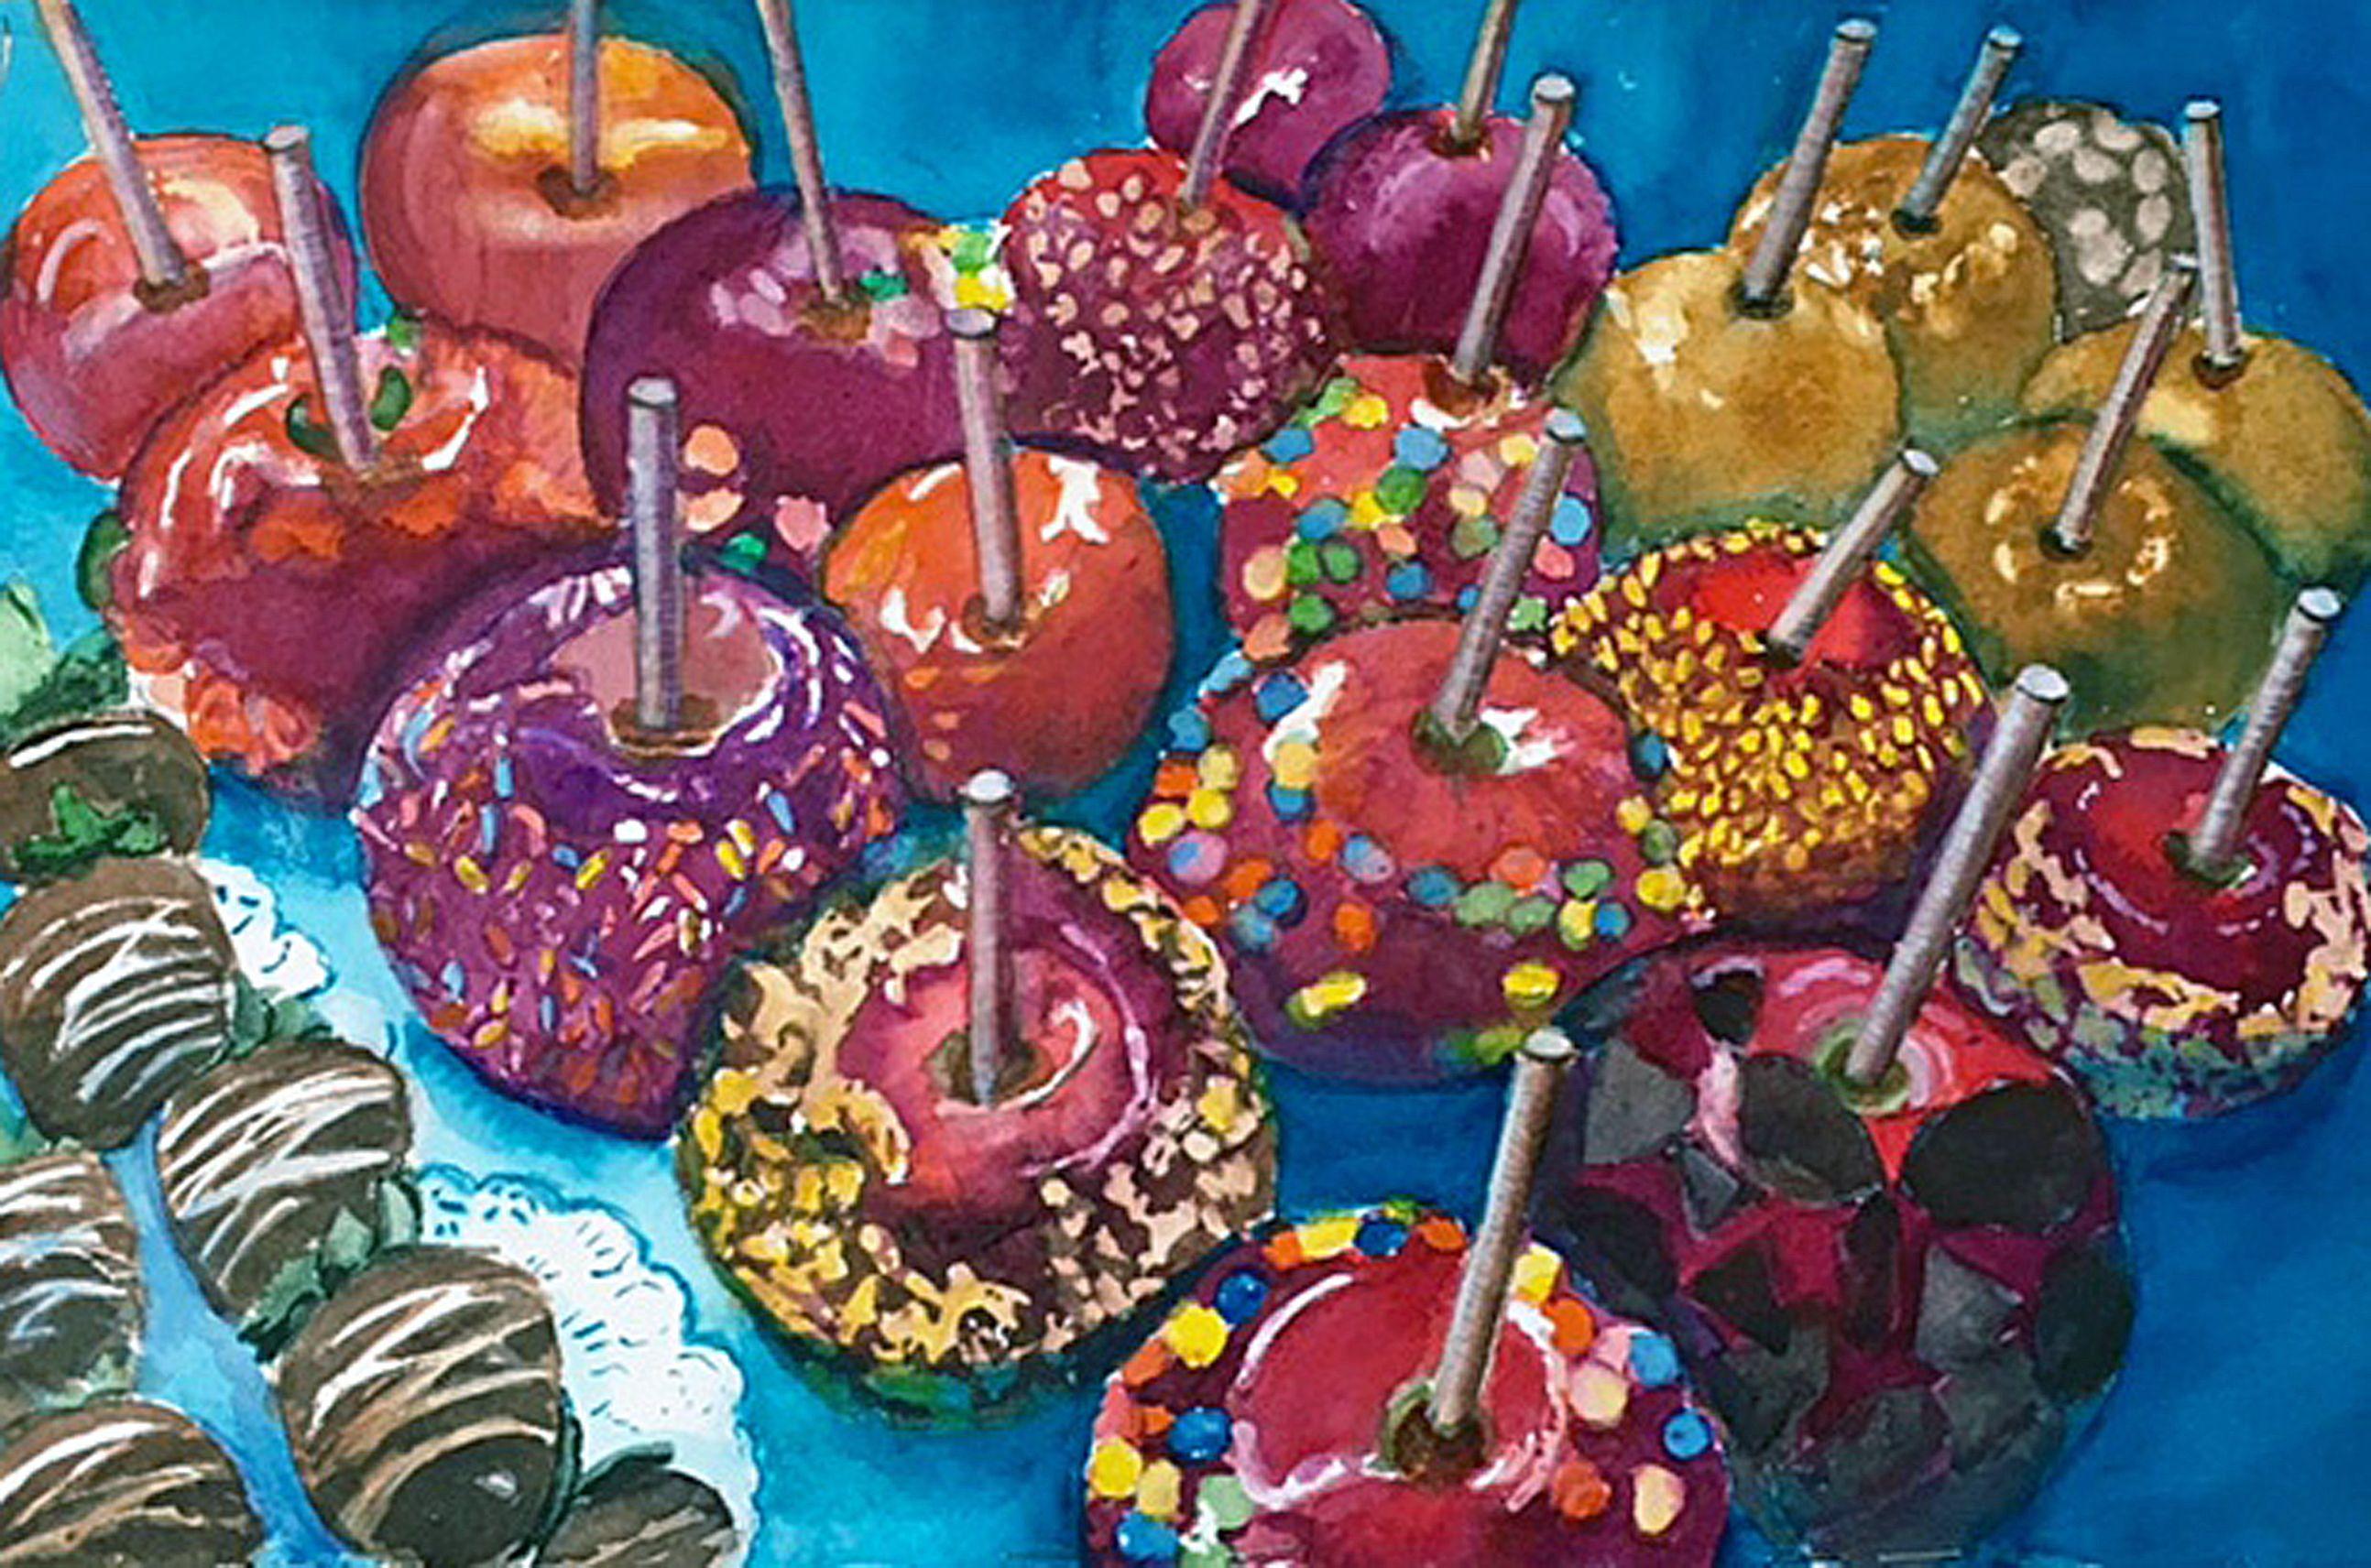 Candy Crush Caramel Apples, Painting, Watercolor on Watercolor Paper - Art by Lynne Atwood